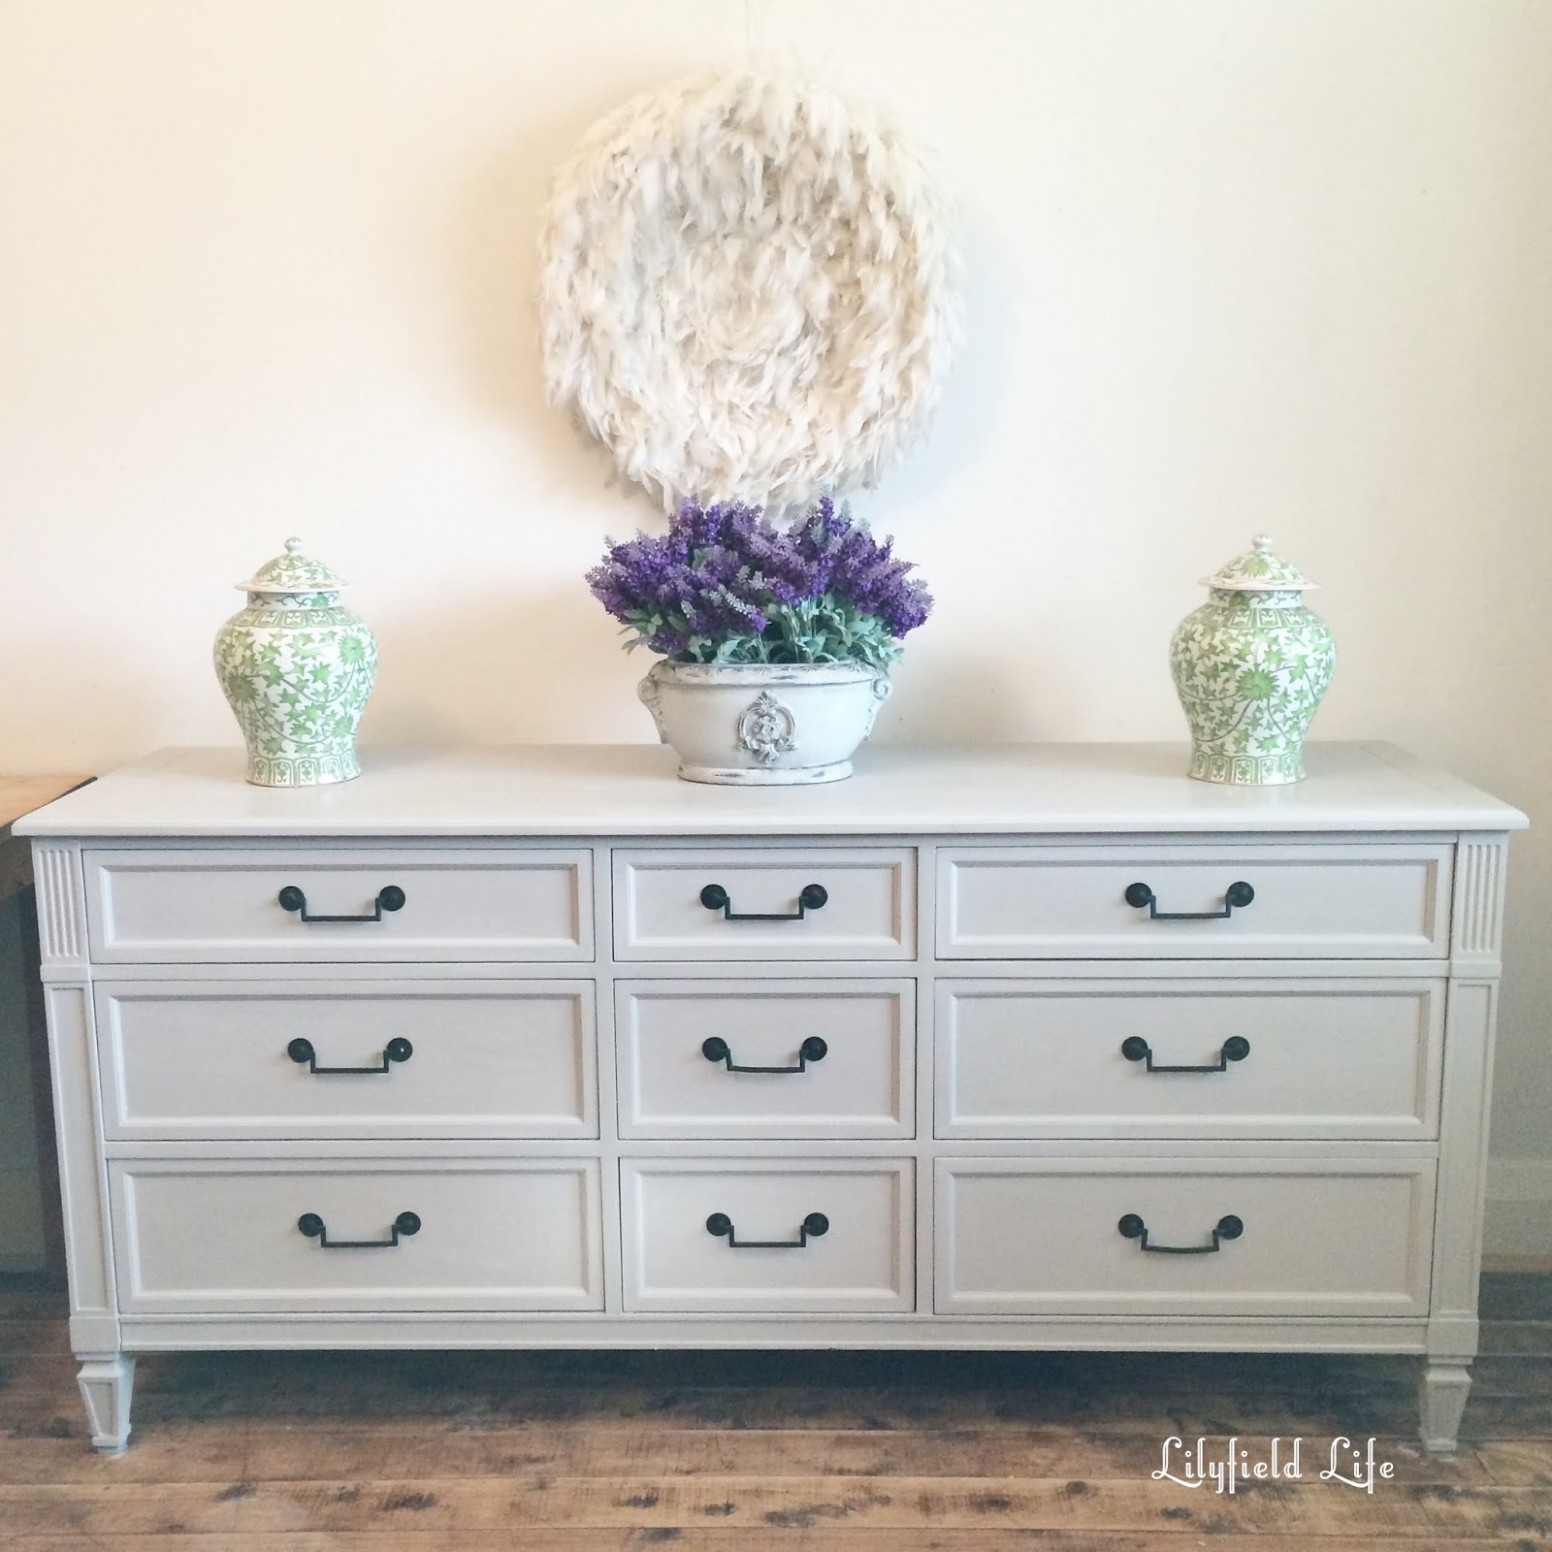 Lilyfield Life: Hand Painted French Drawers In Pale Taupe Where To Buy Chalk Paint In Sydney